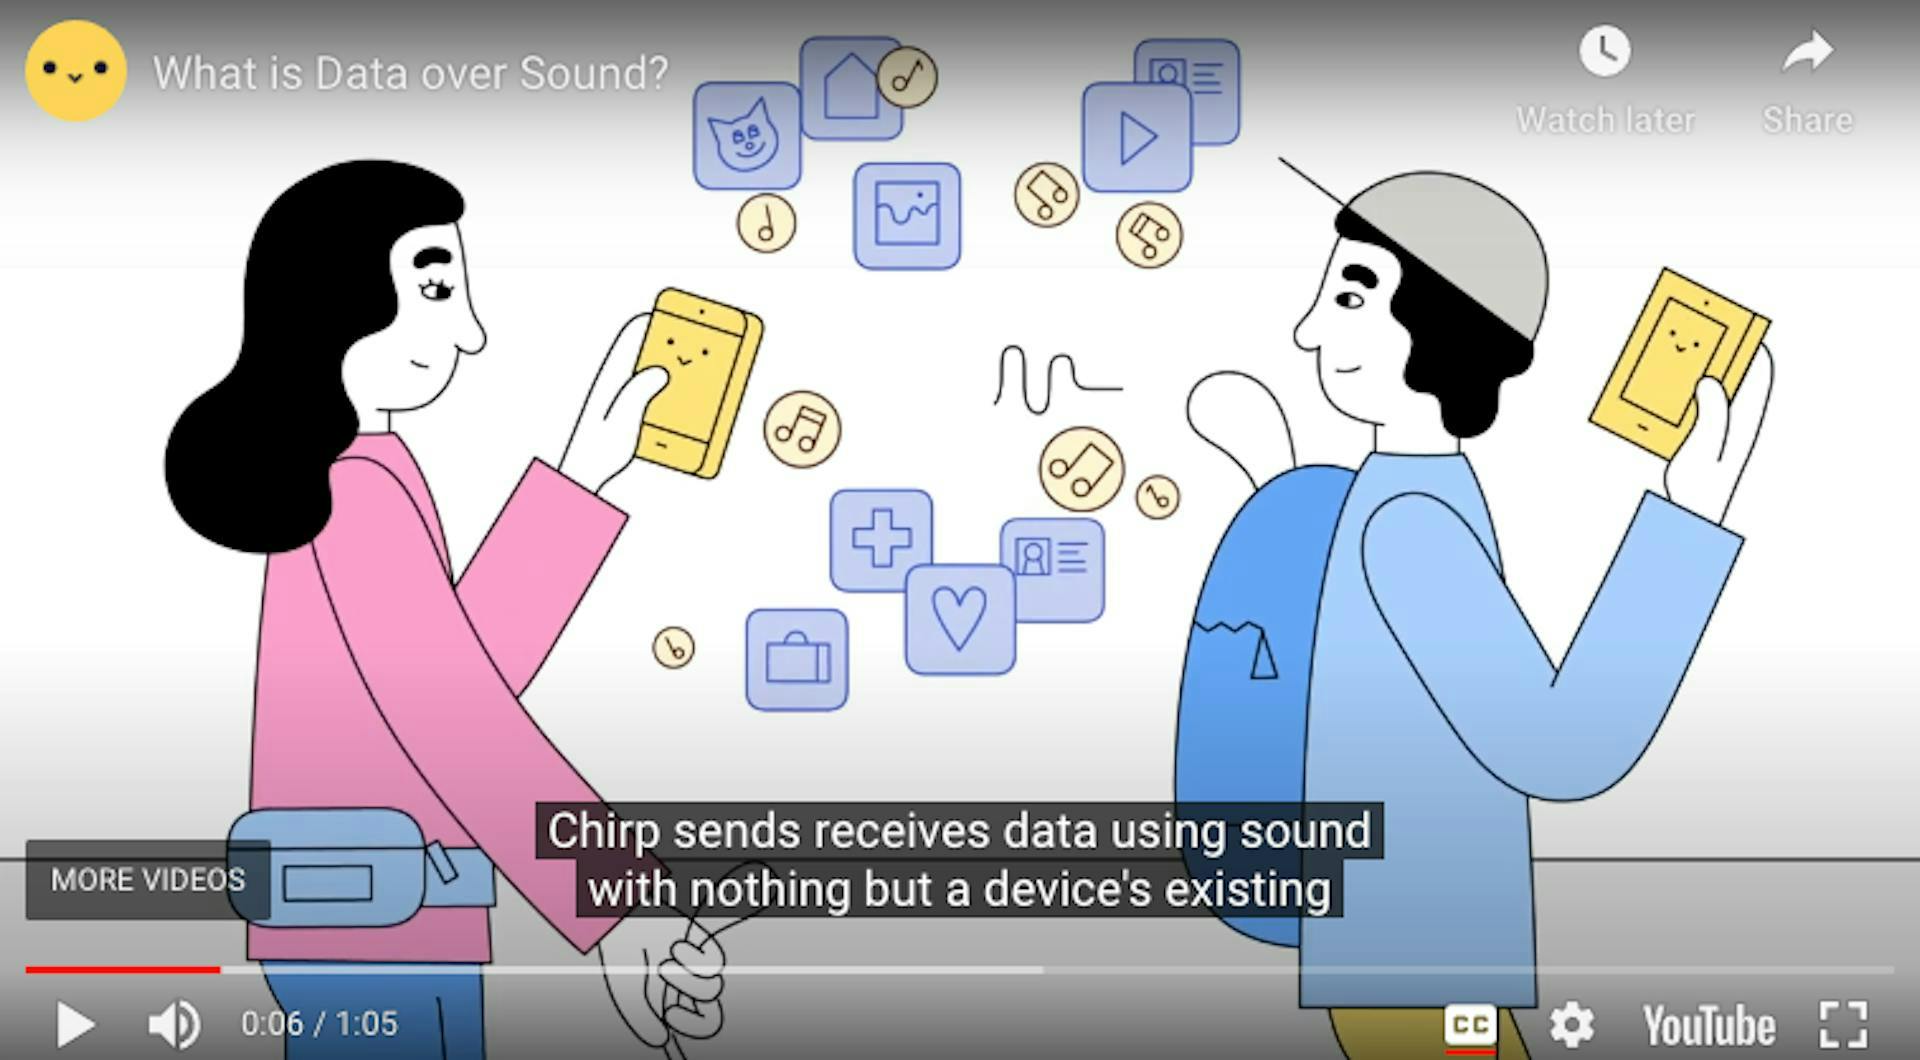 Chirp's animated explainer video discusses how apps can send and receive information through sound